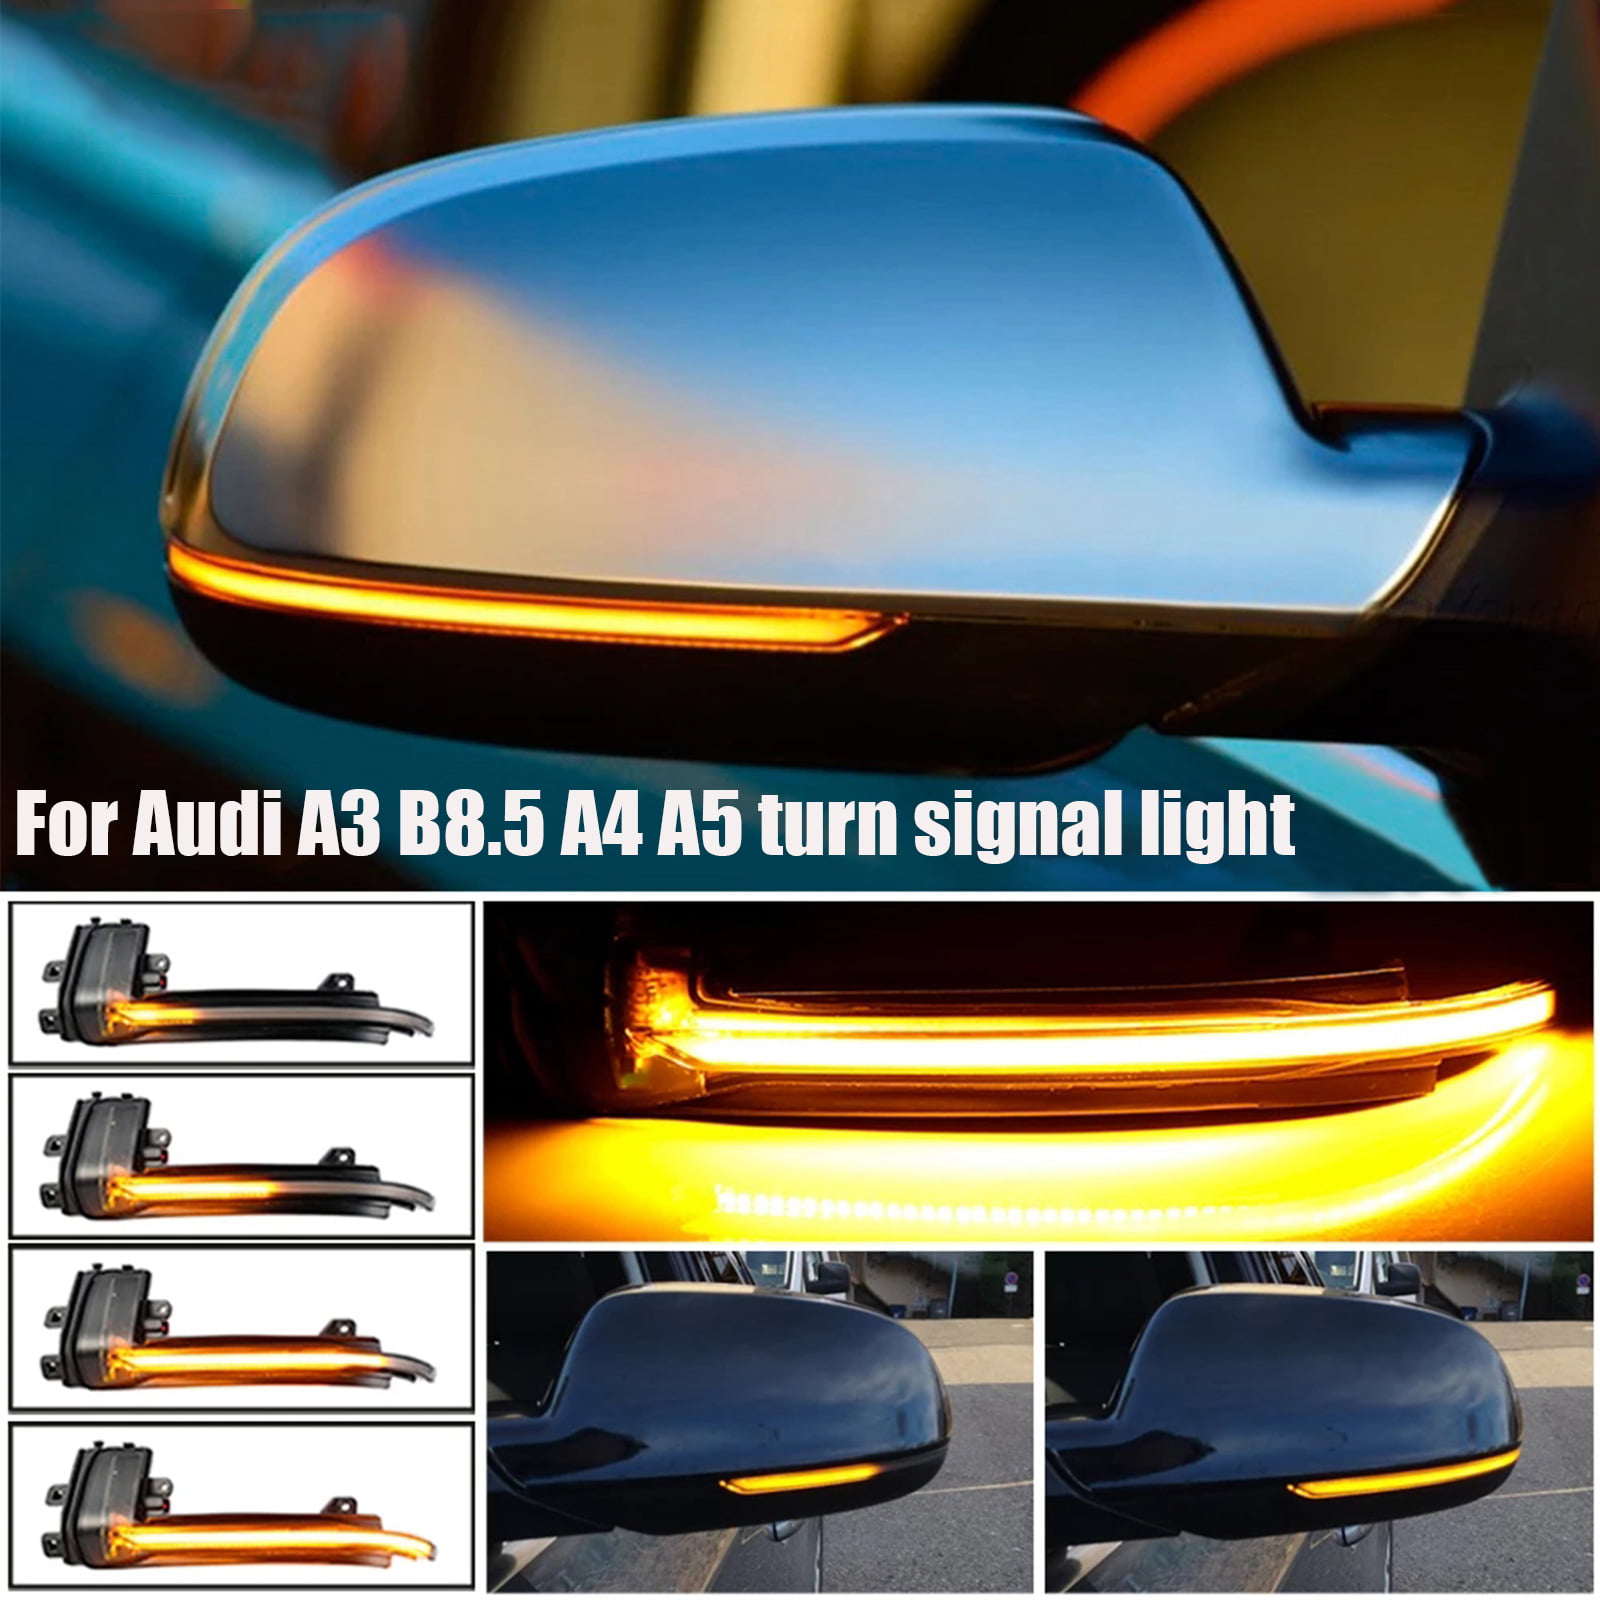 Racing Motorcycle Rear View Wing Mirrors With LED Turn Signal Lights Indicators